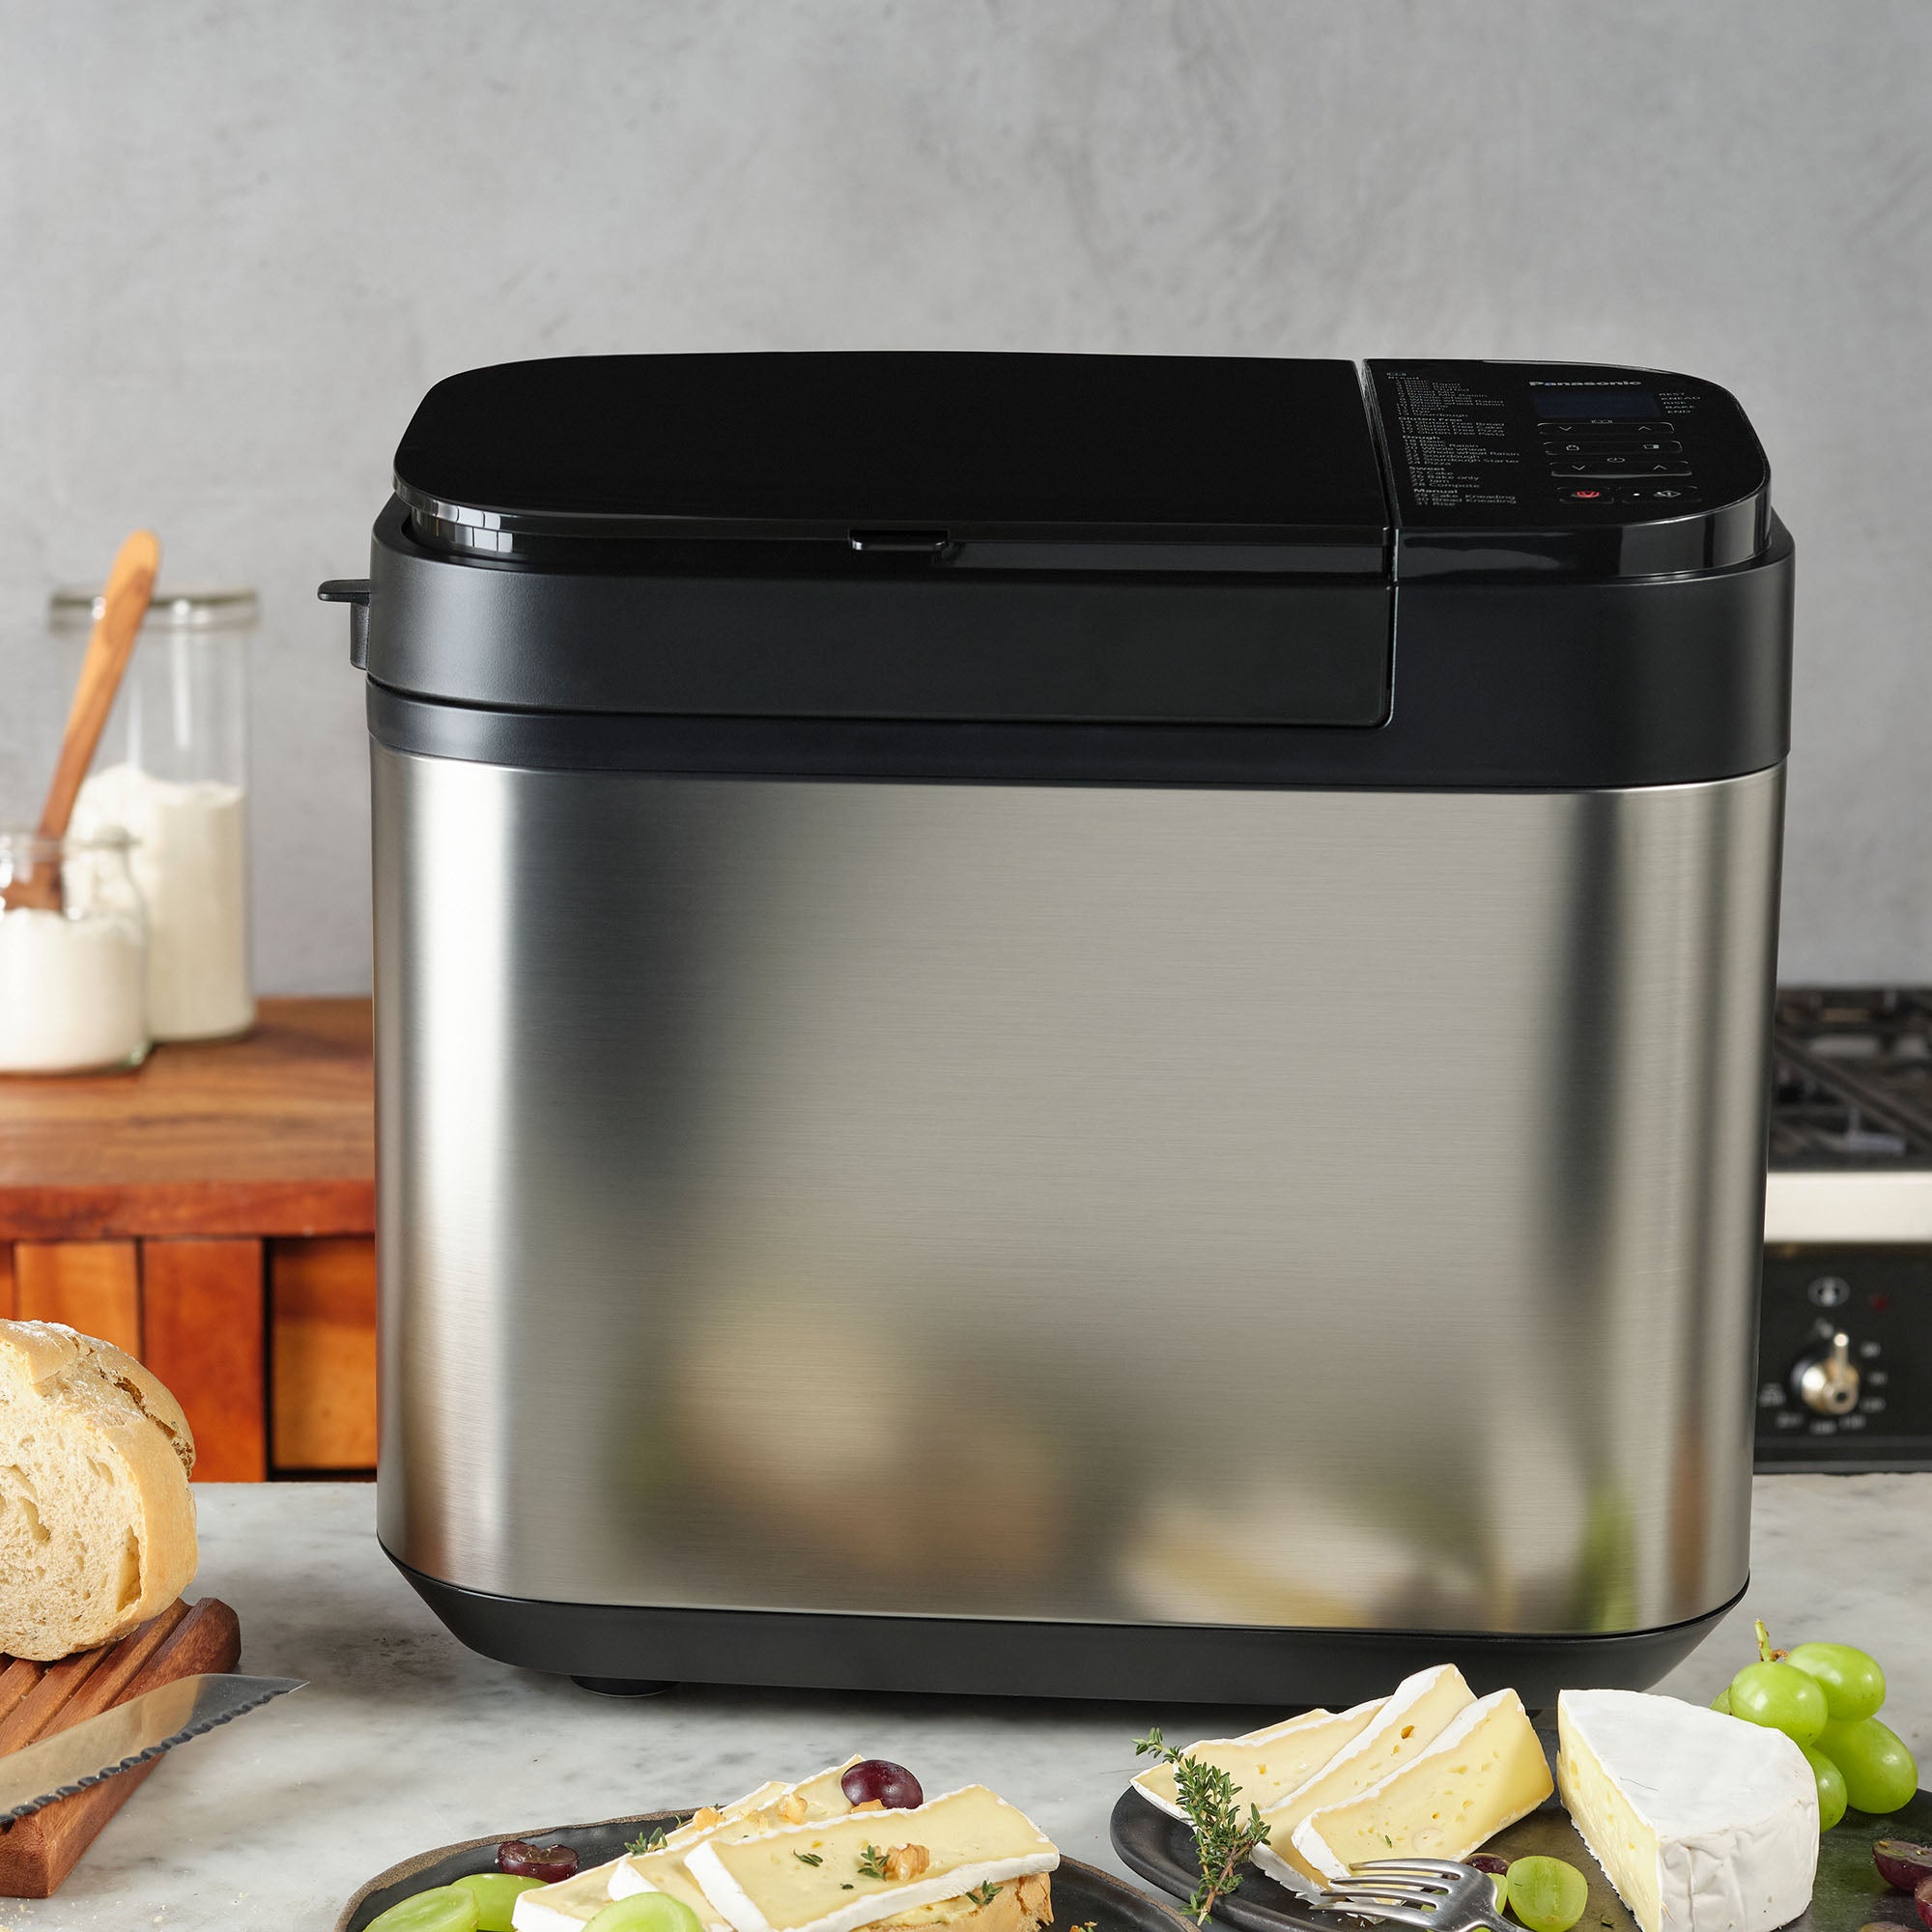 Panasonic Bread Maker review: A versatile, easy-to-use machine